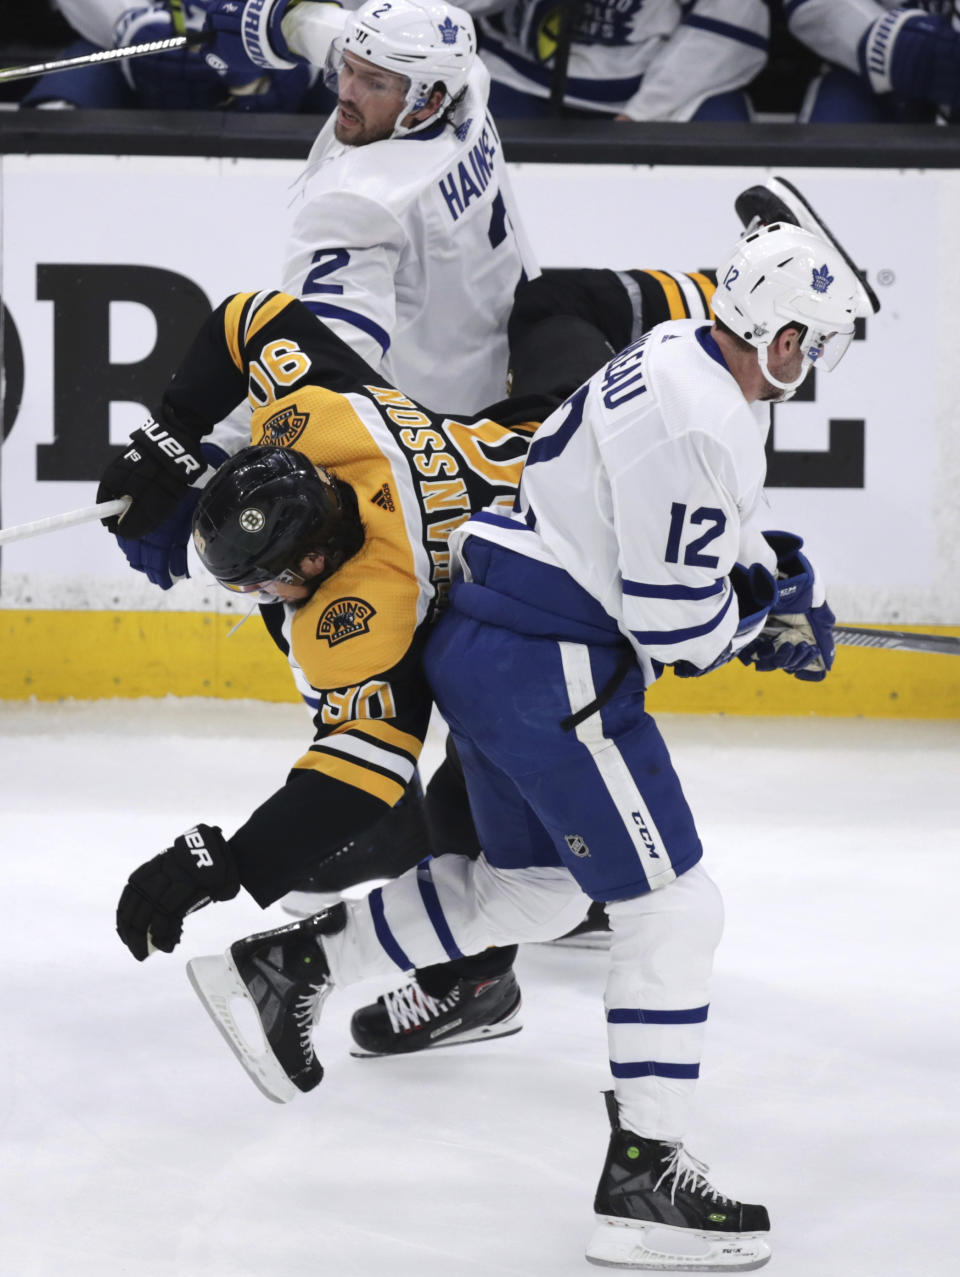 Boston Bruins left wing Marcus Johansson (90) goes airborne as he is sandwiched between Toronto Maple Leafs center Patrick Marleau (12) and defenseman Ron Hainsey (2) during the first period of Game 7 of an NHL hockey first-round playoff series, Tuesday, April 23, 2019, in Boston. (AP Photo/Charles Krupa)